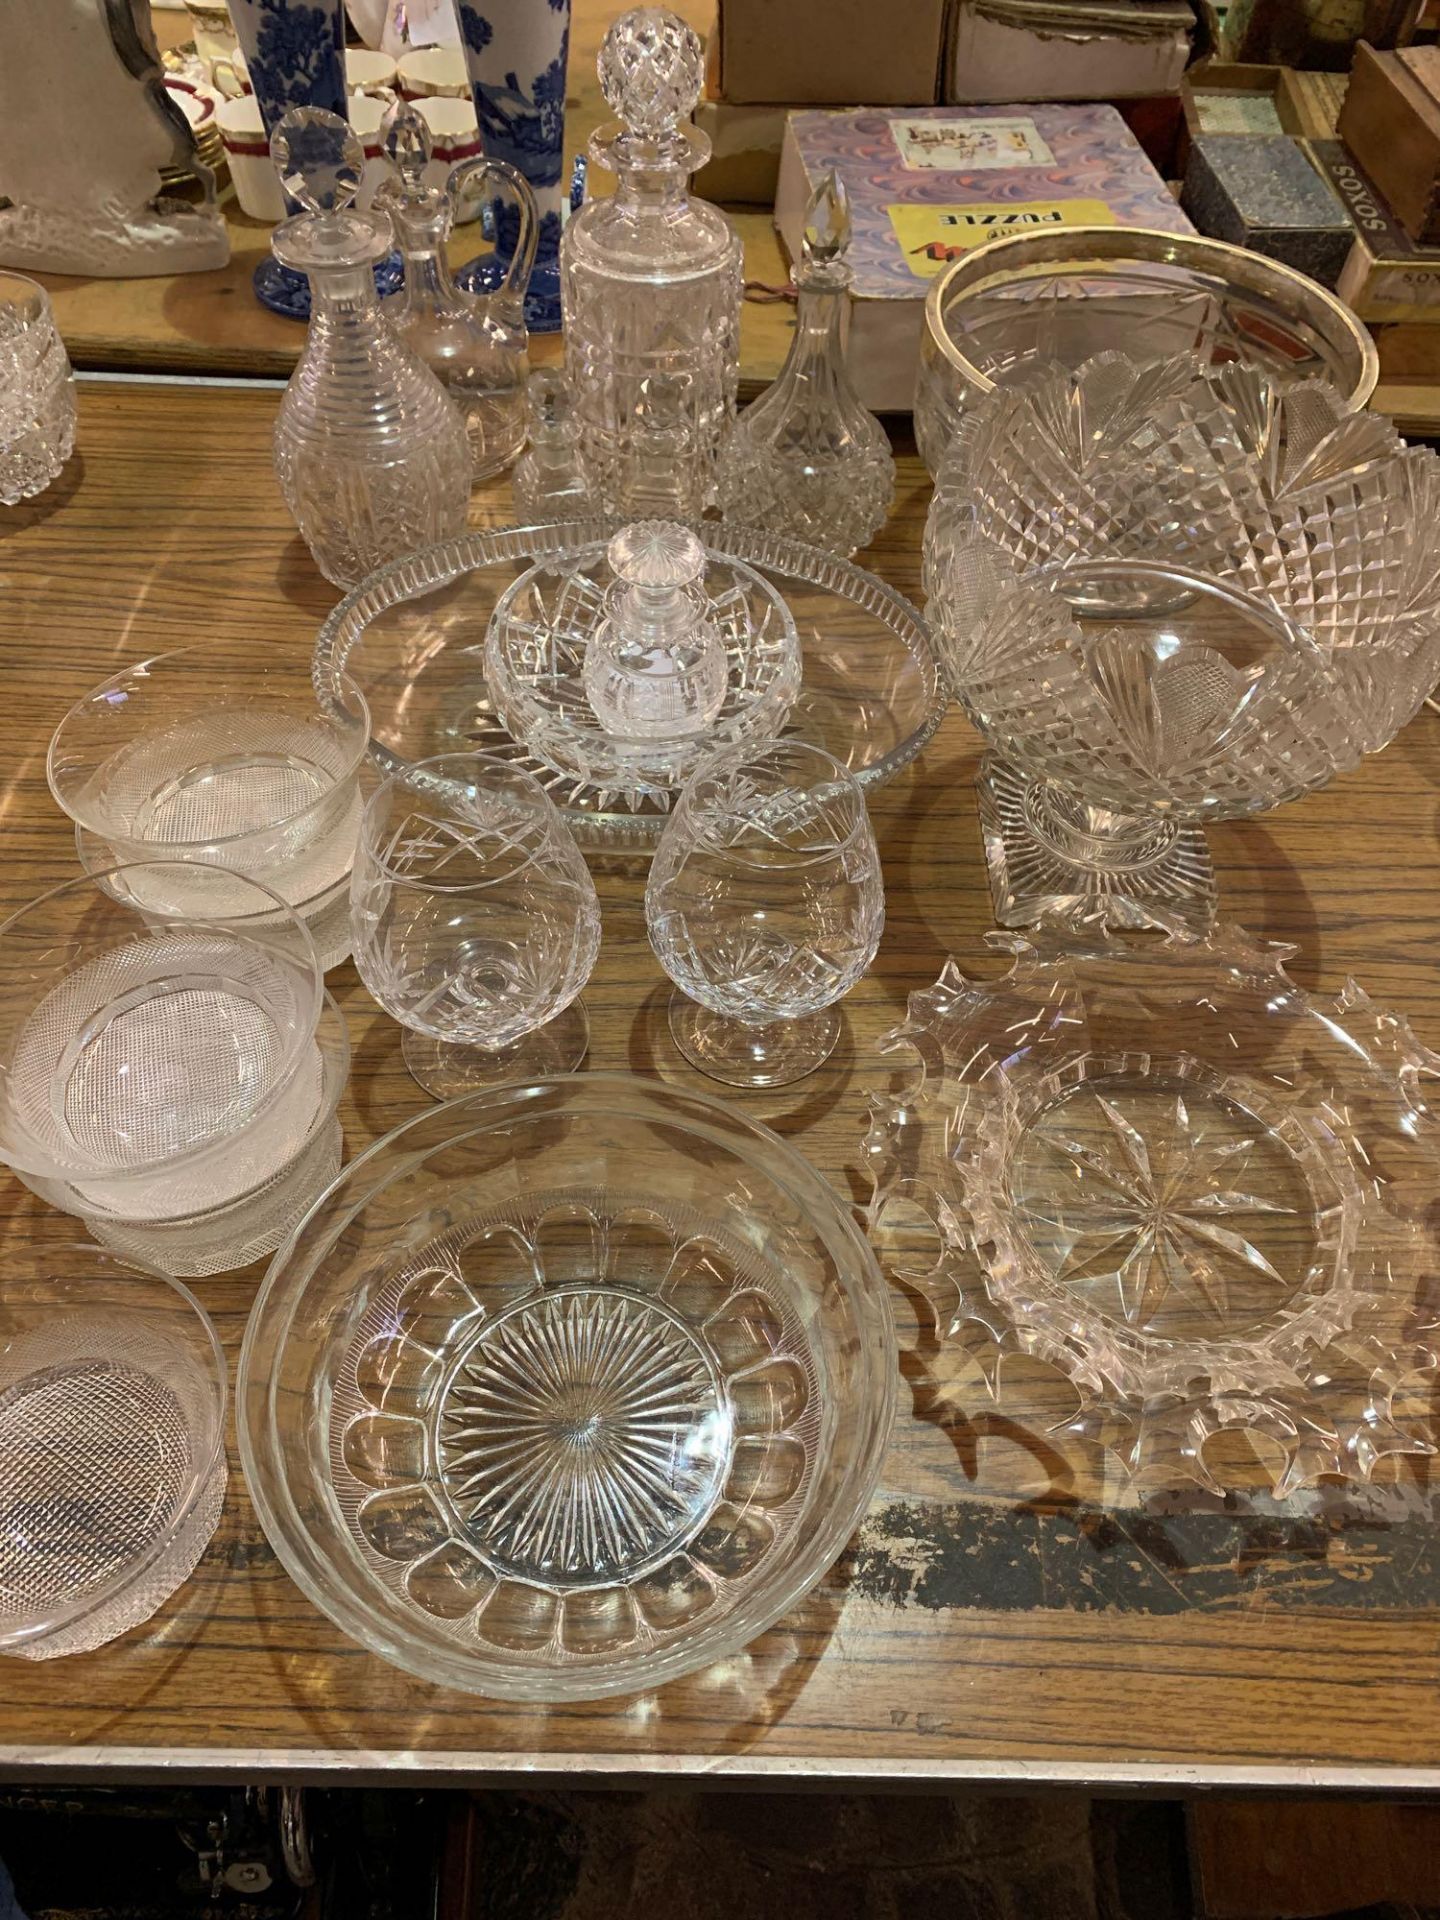 Three cut glass decanters and other cut glass items